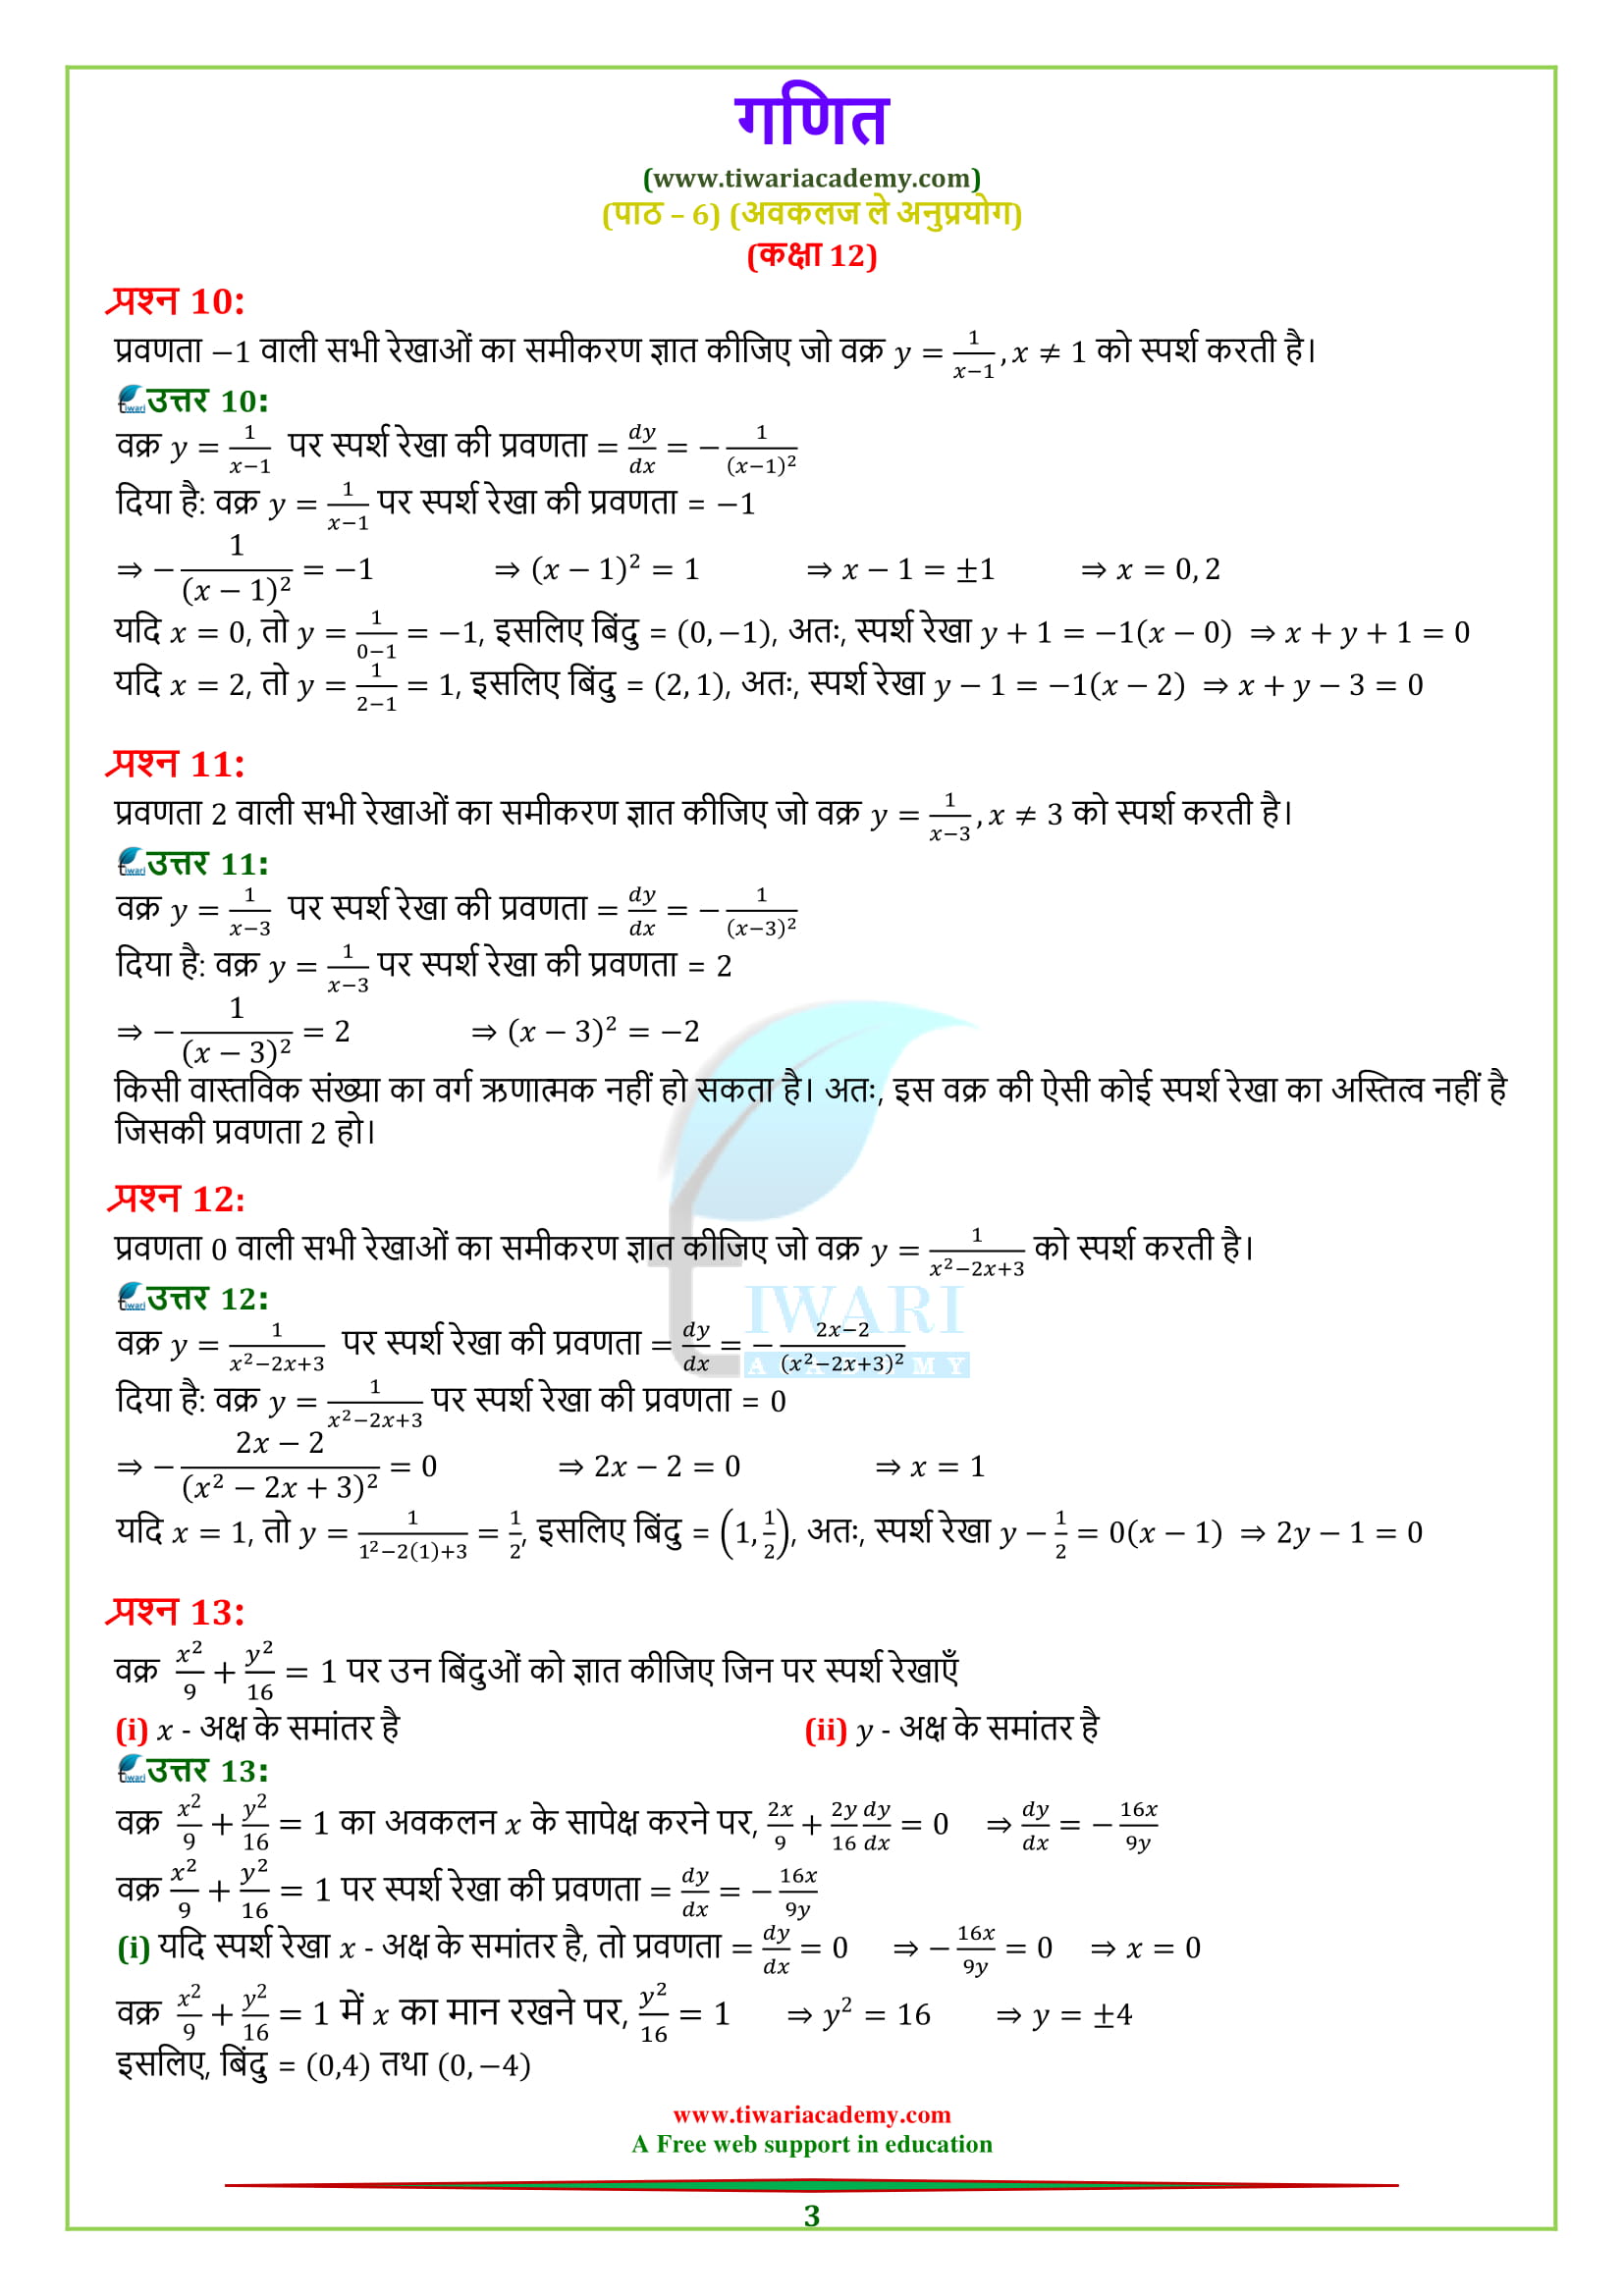 12 Maths Exercise 6.3 solutions for UP board students hindi me.